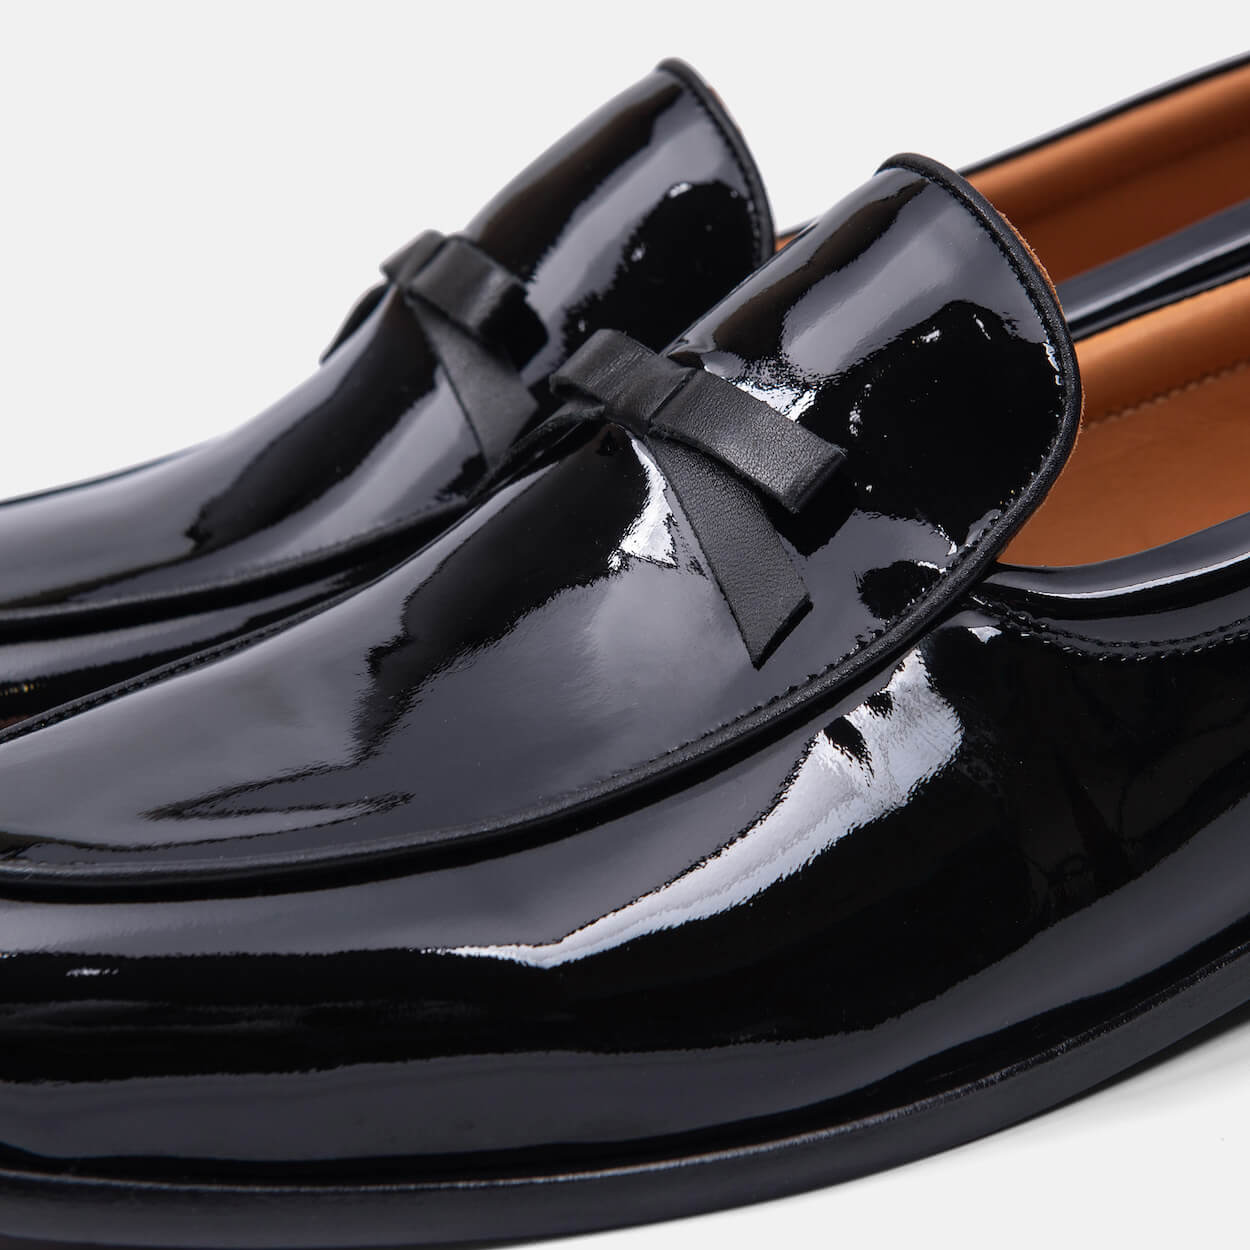 Odell Black Patent Leather Belgian Loafers - Marc Nolan